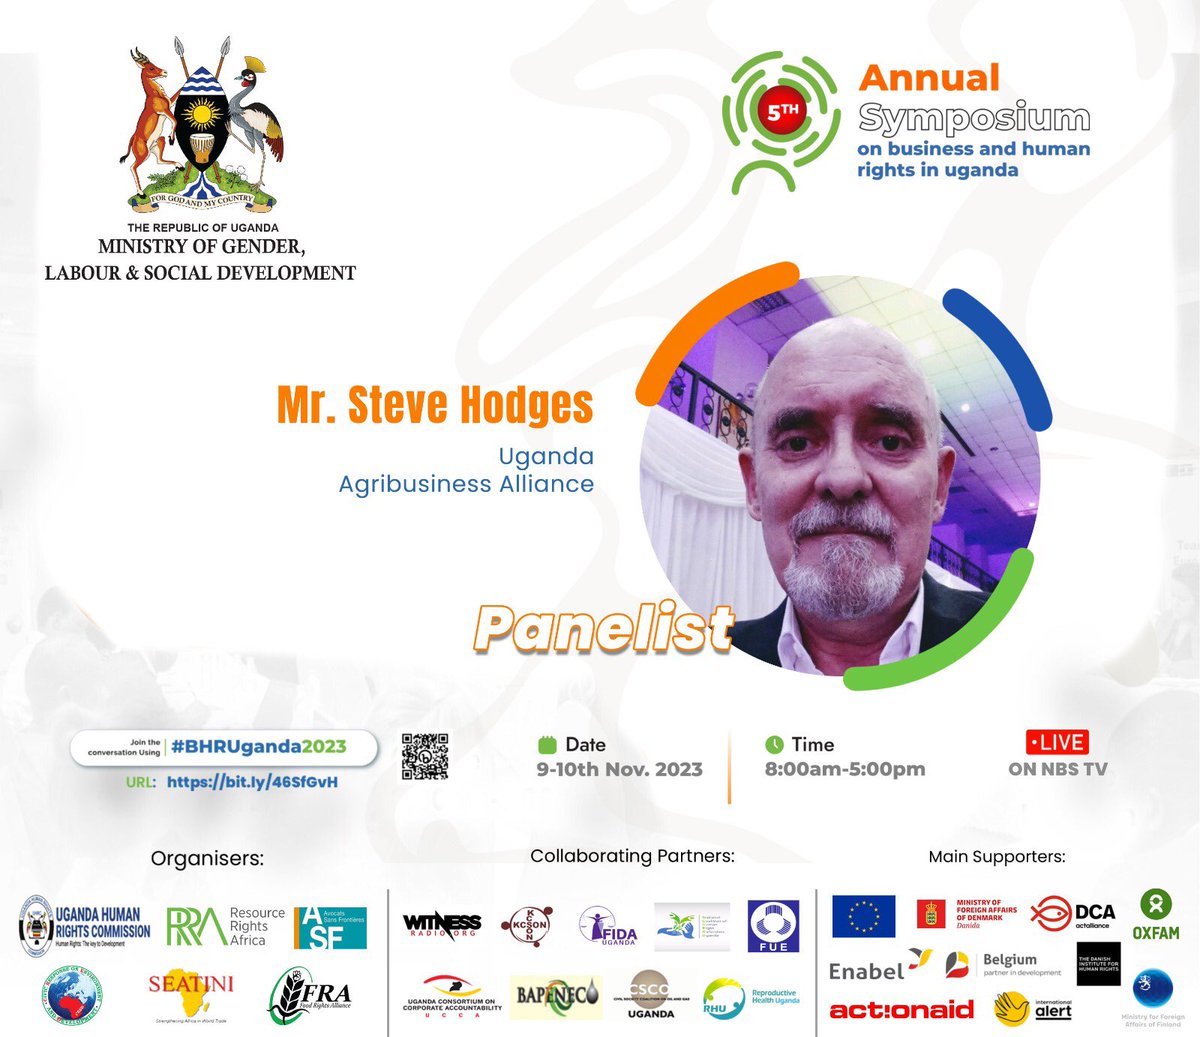 The great panel with a diverse knowledge in different sectors . All for the national symposium on business and human rights. #BHRuganda2023